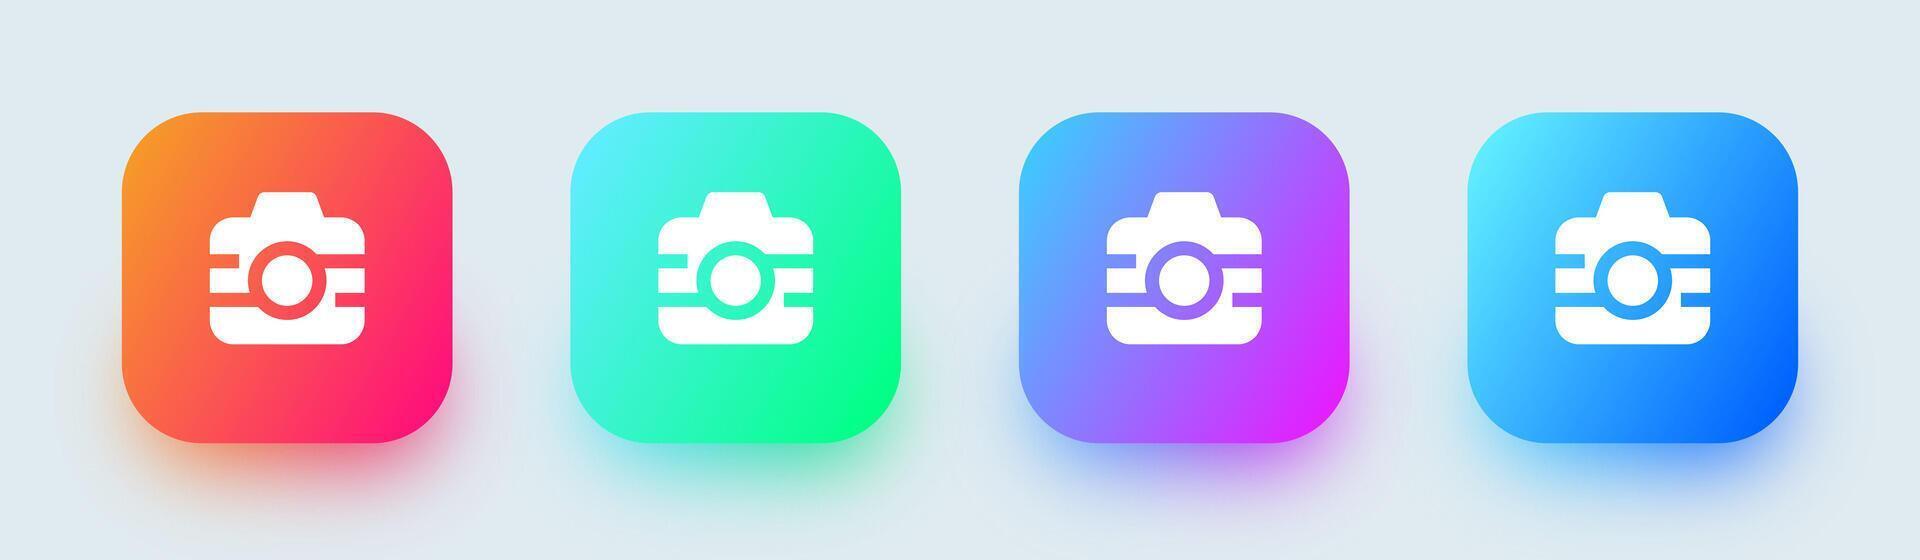 Camera solid icon in square gradient colors. Capture buttons signs illustration. vector